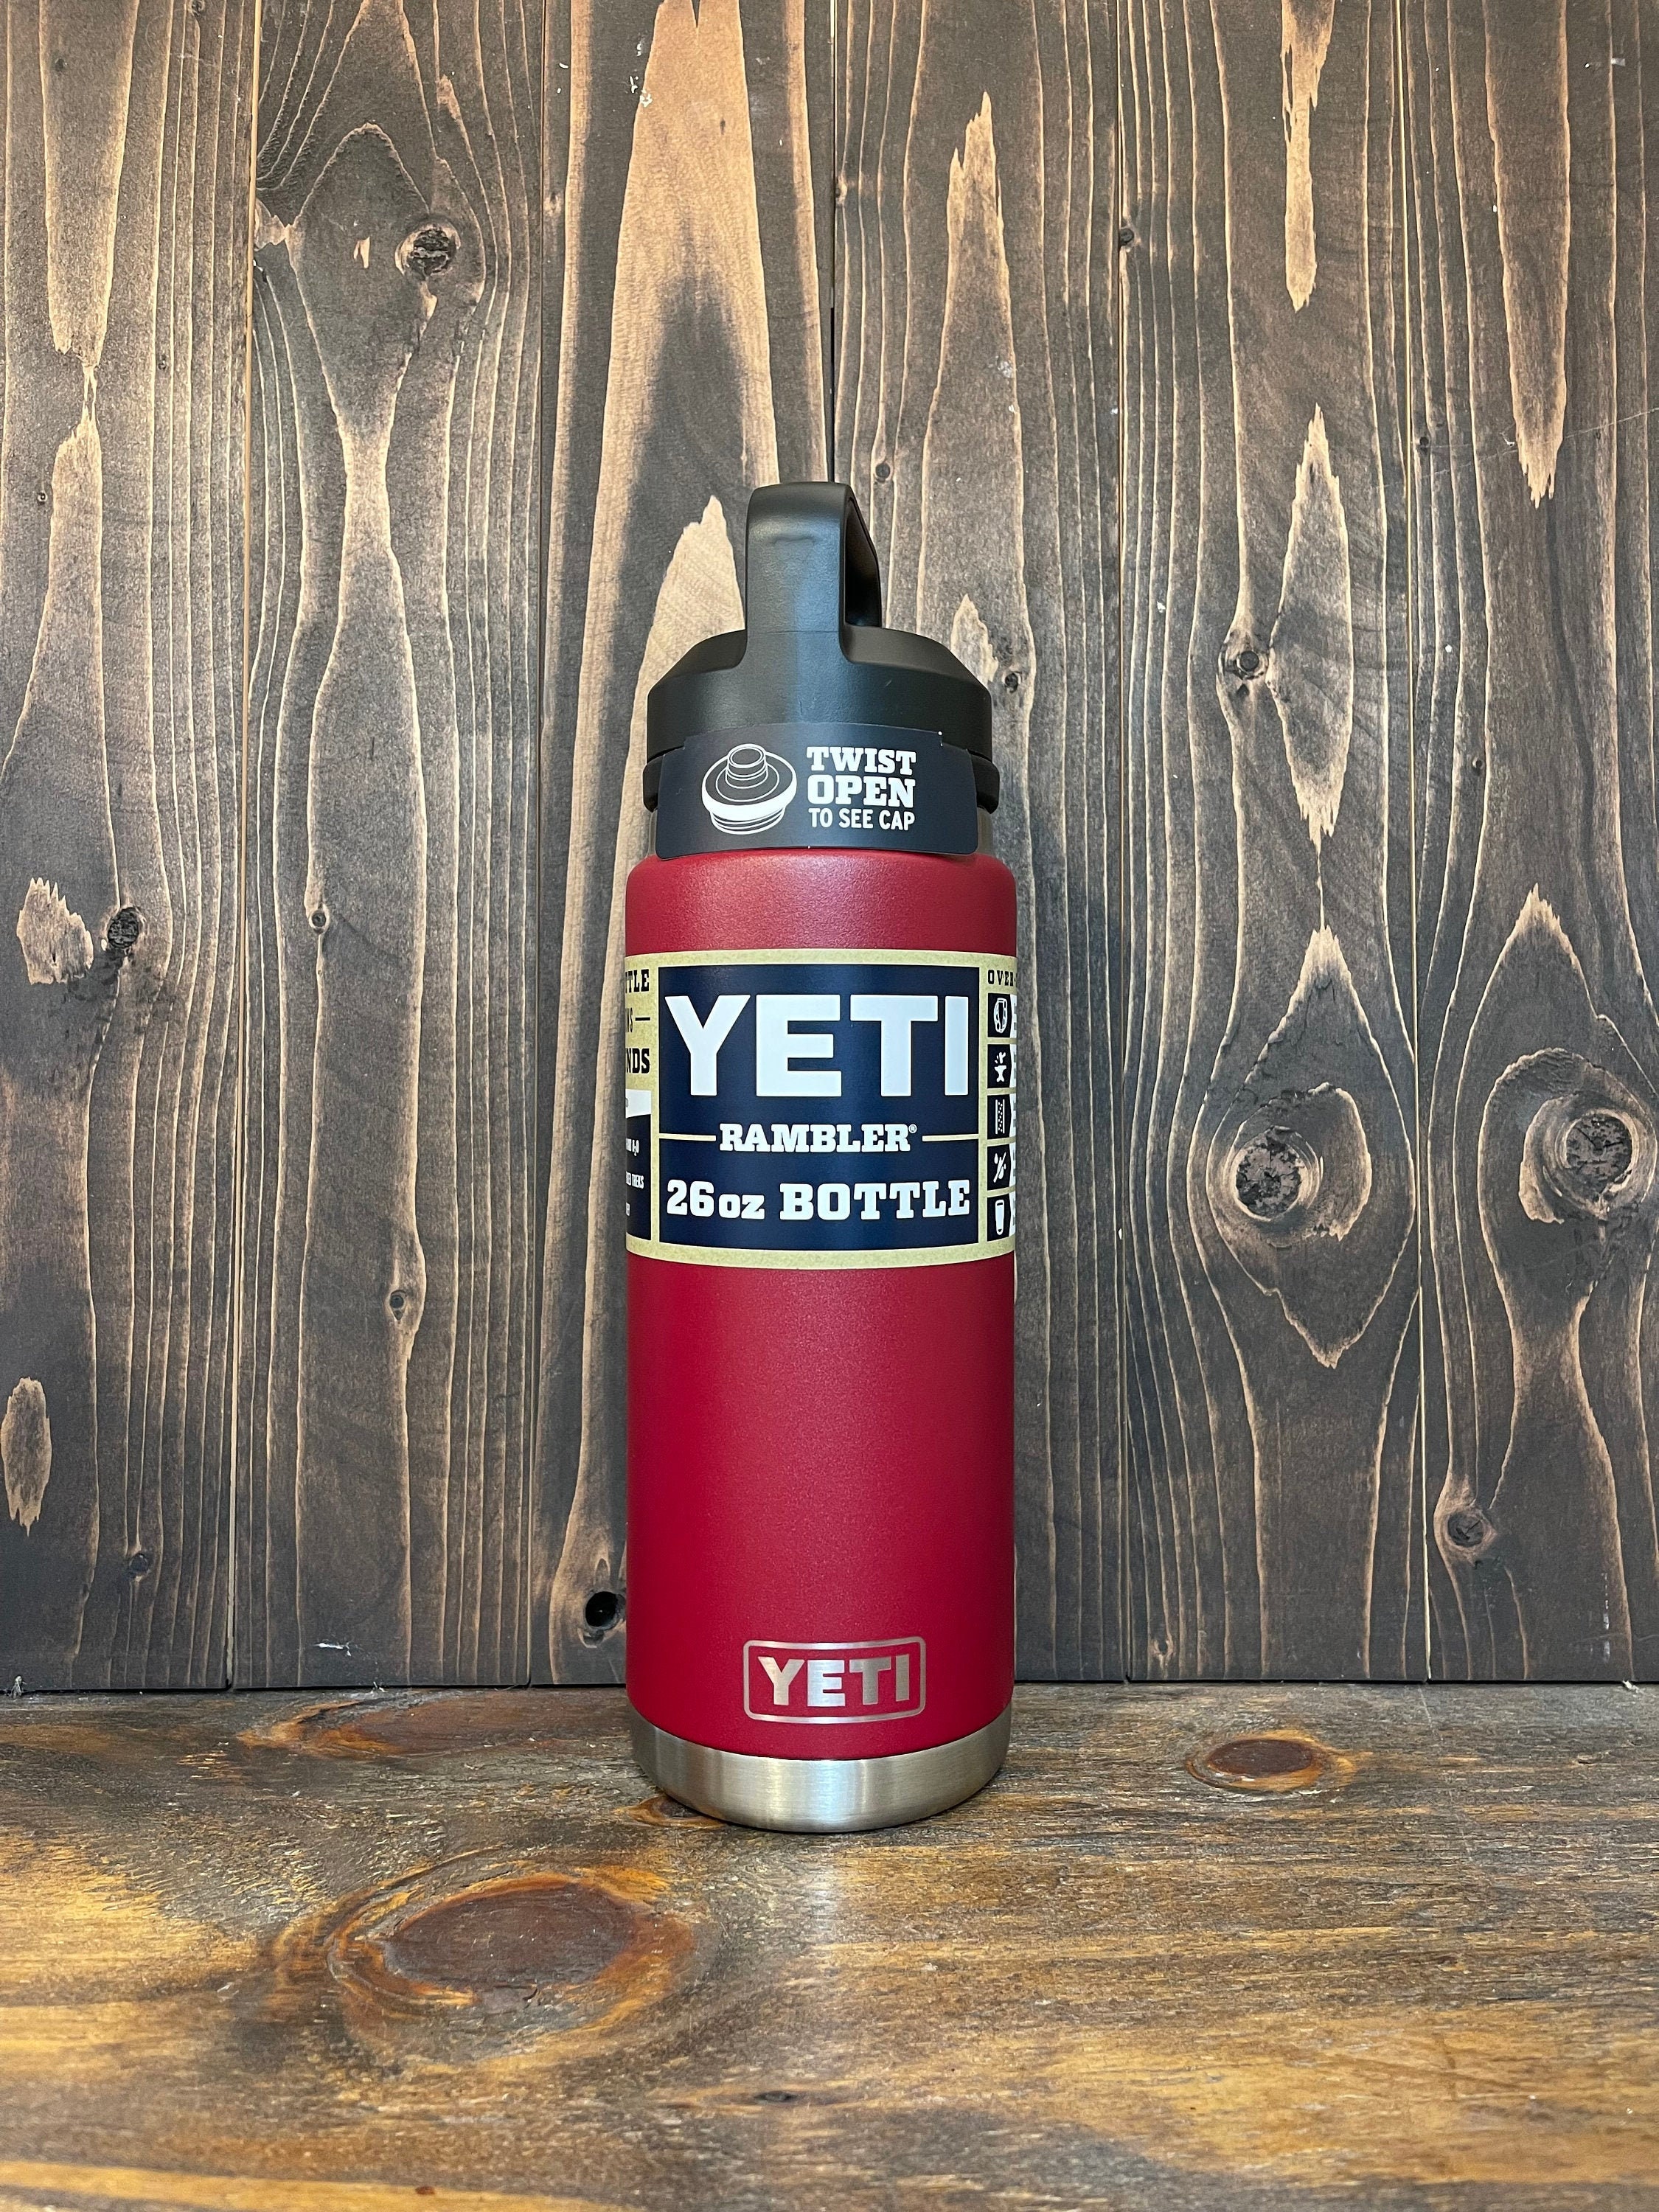 YETI 46oz Bottle HARVEST RED Limited Edition - Sold Out - Brand New